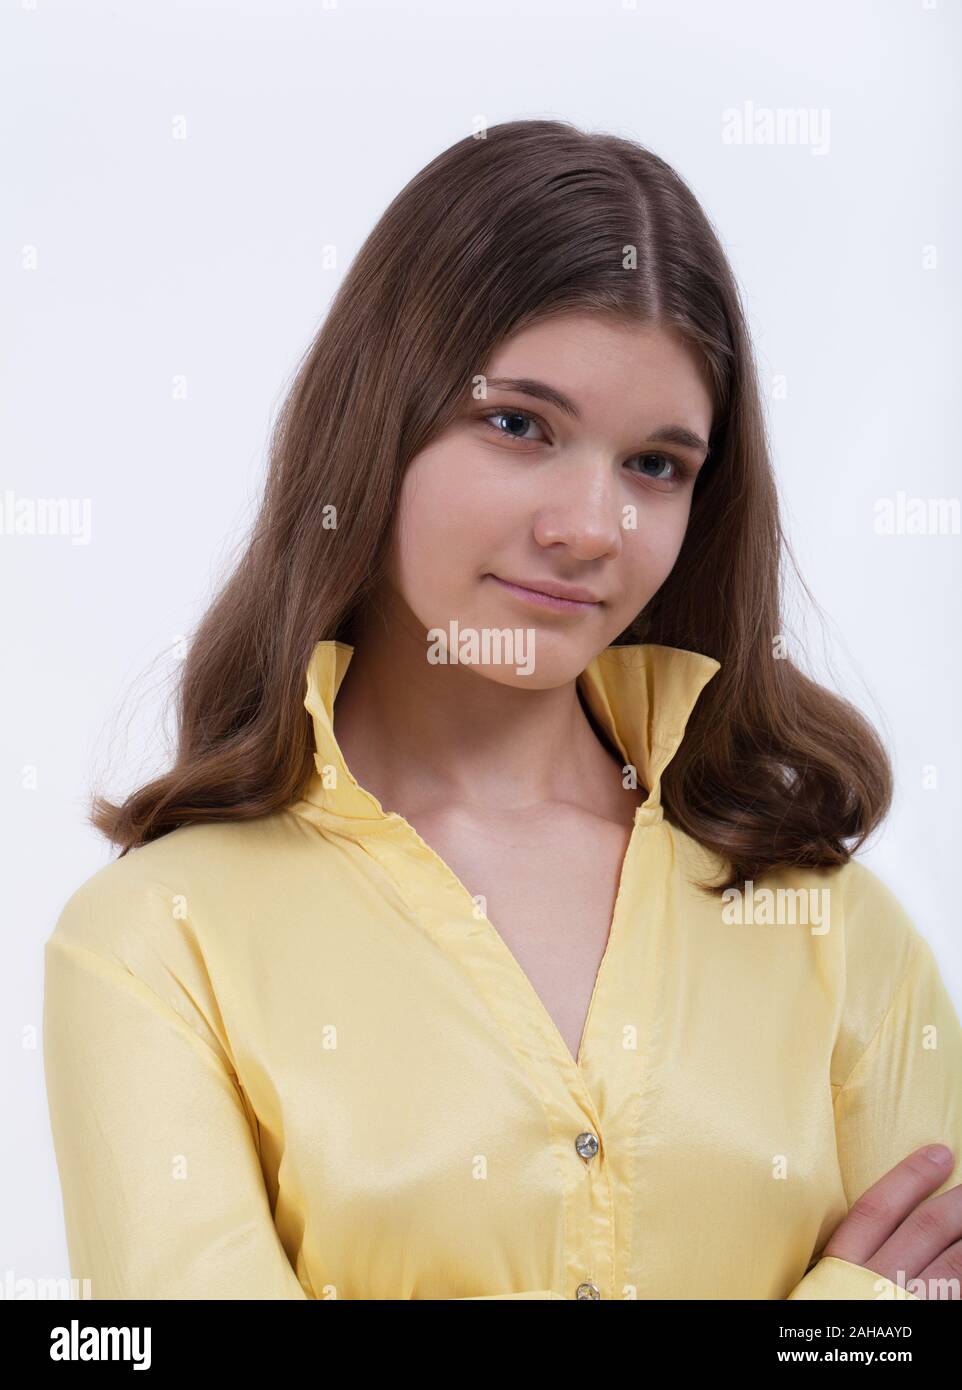 Closeup portrait of a girl with long hair in a yellow blouse with a standing collar on a light background Stock Photo